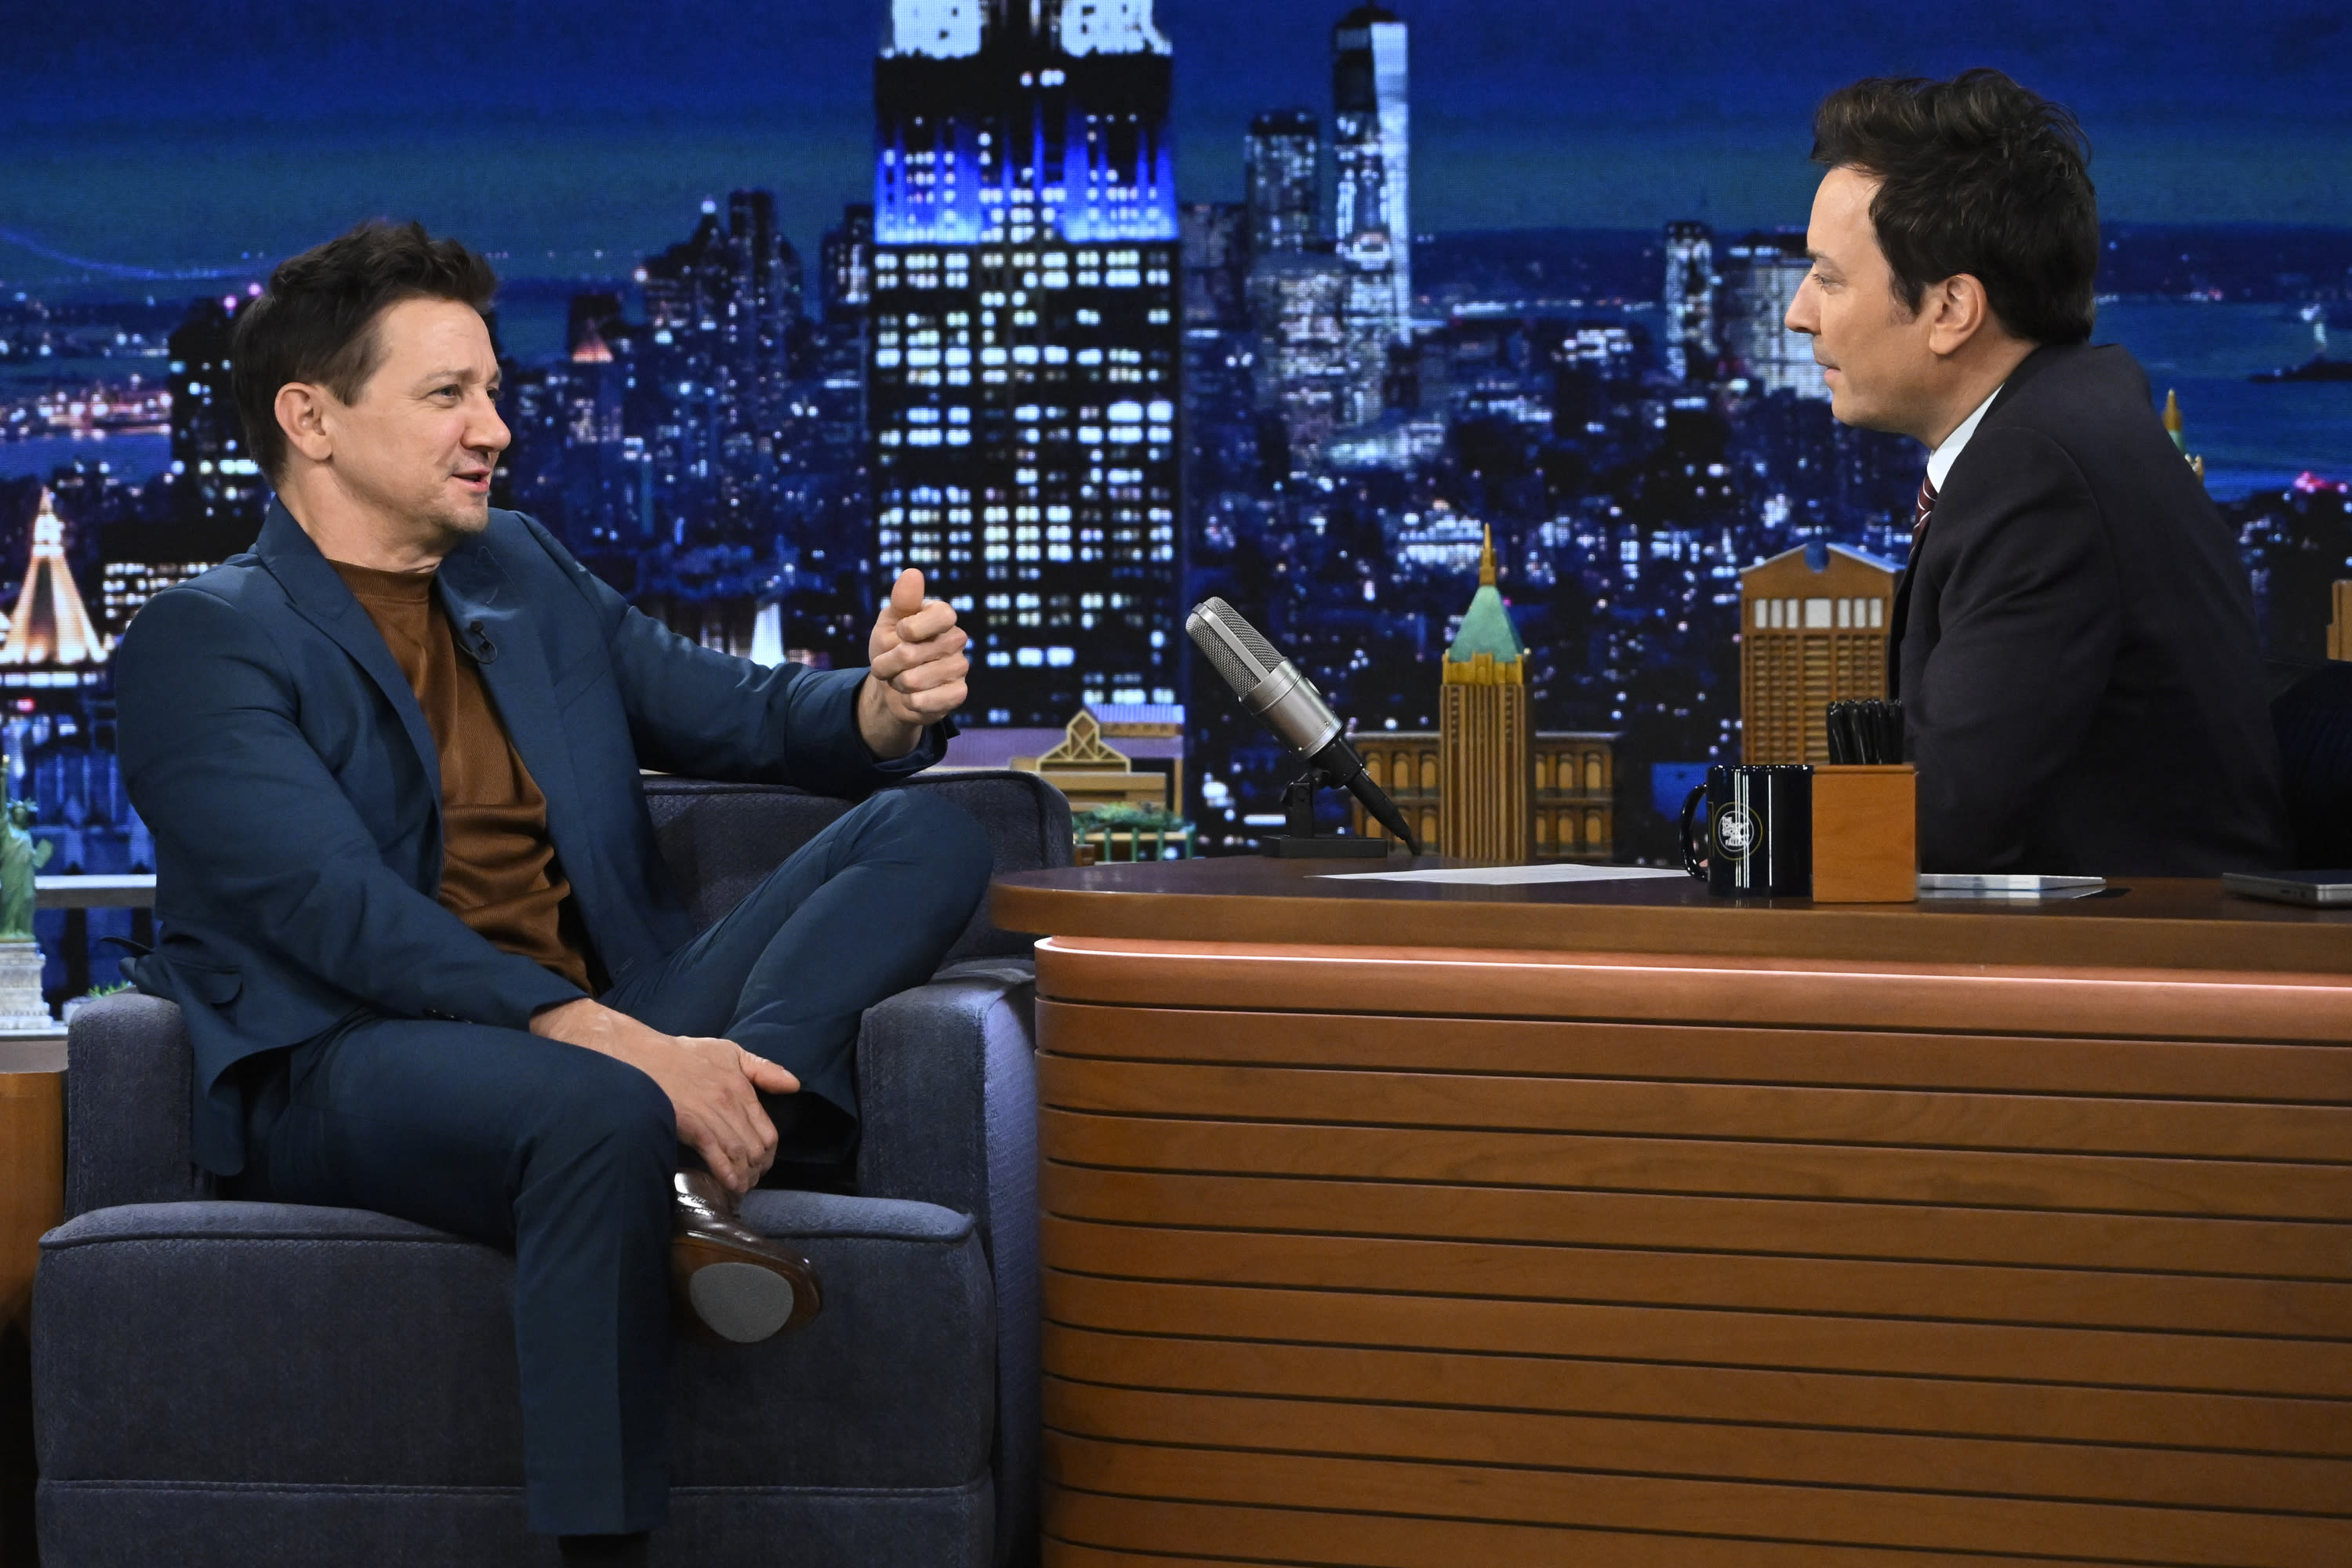 Jeremy Renner Tells Jimmy Fallon Of Lessons Learned From Horrific Snowplow Accident